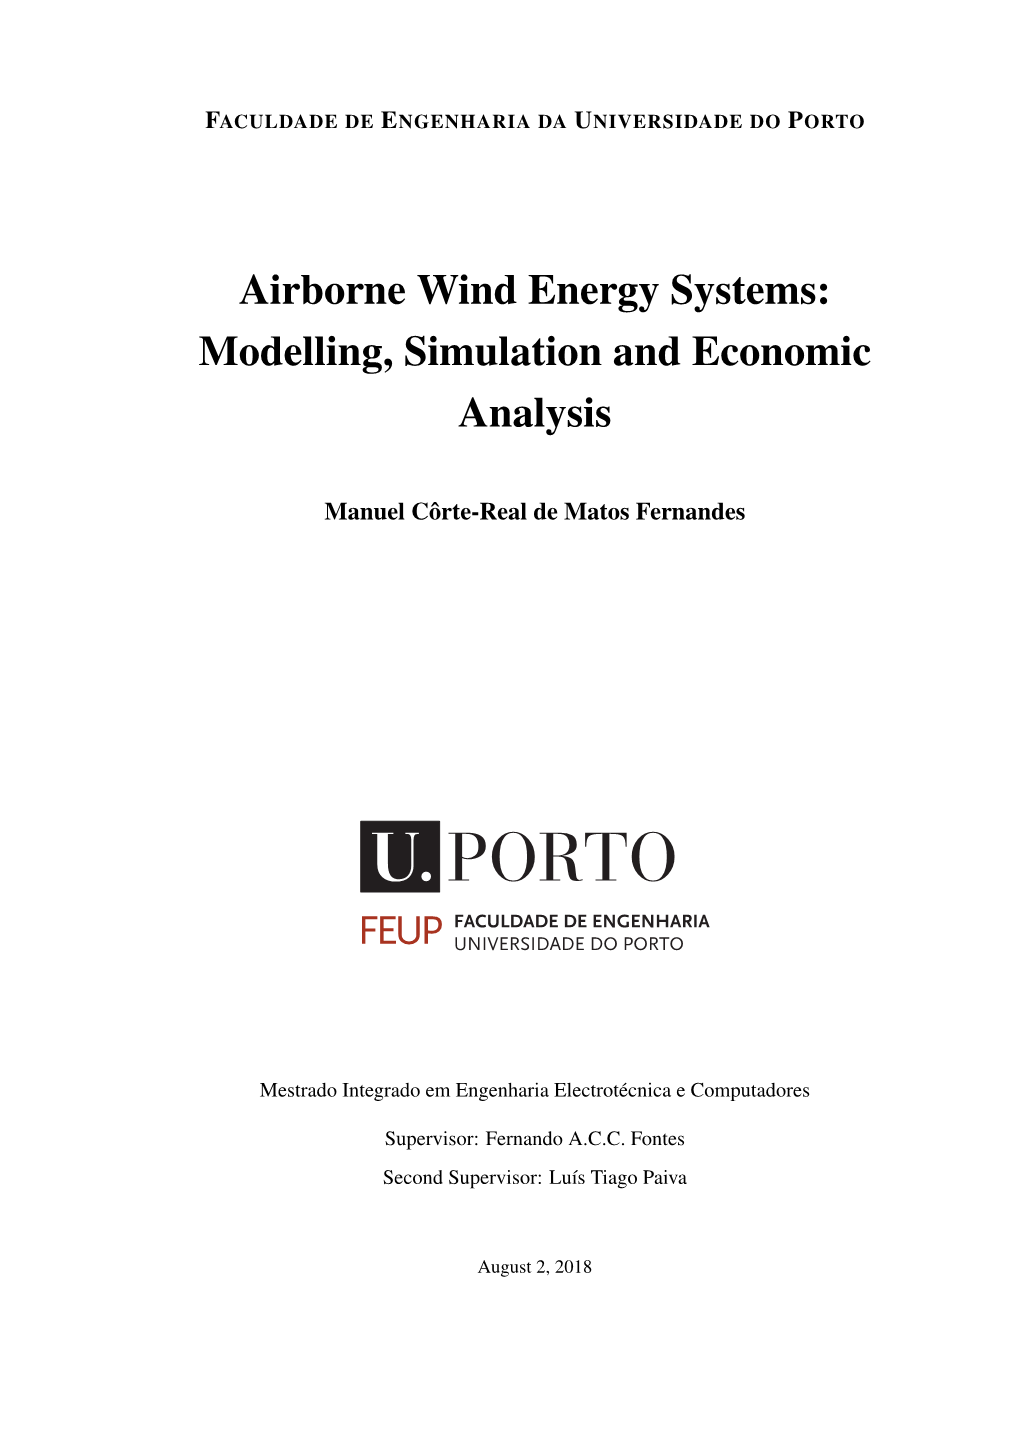 Airborne Wind Energy Systems: Modelling, Simulation and Economic Analysis